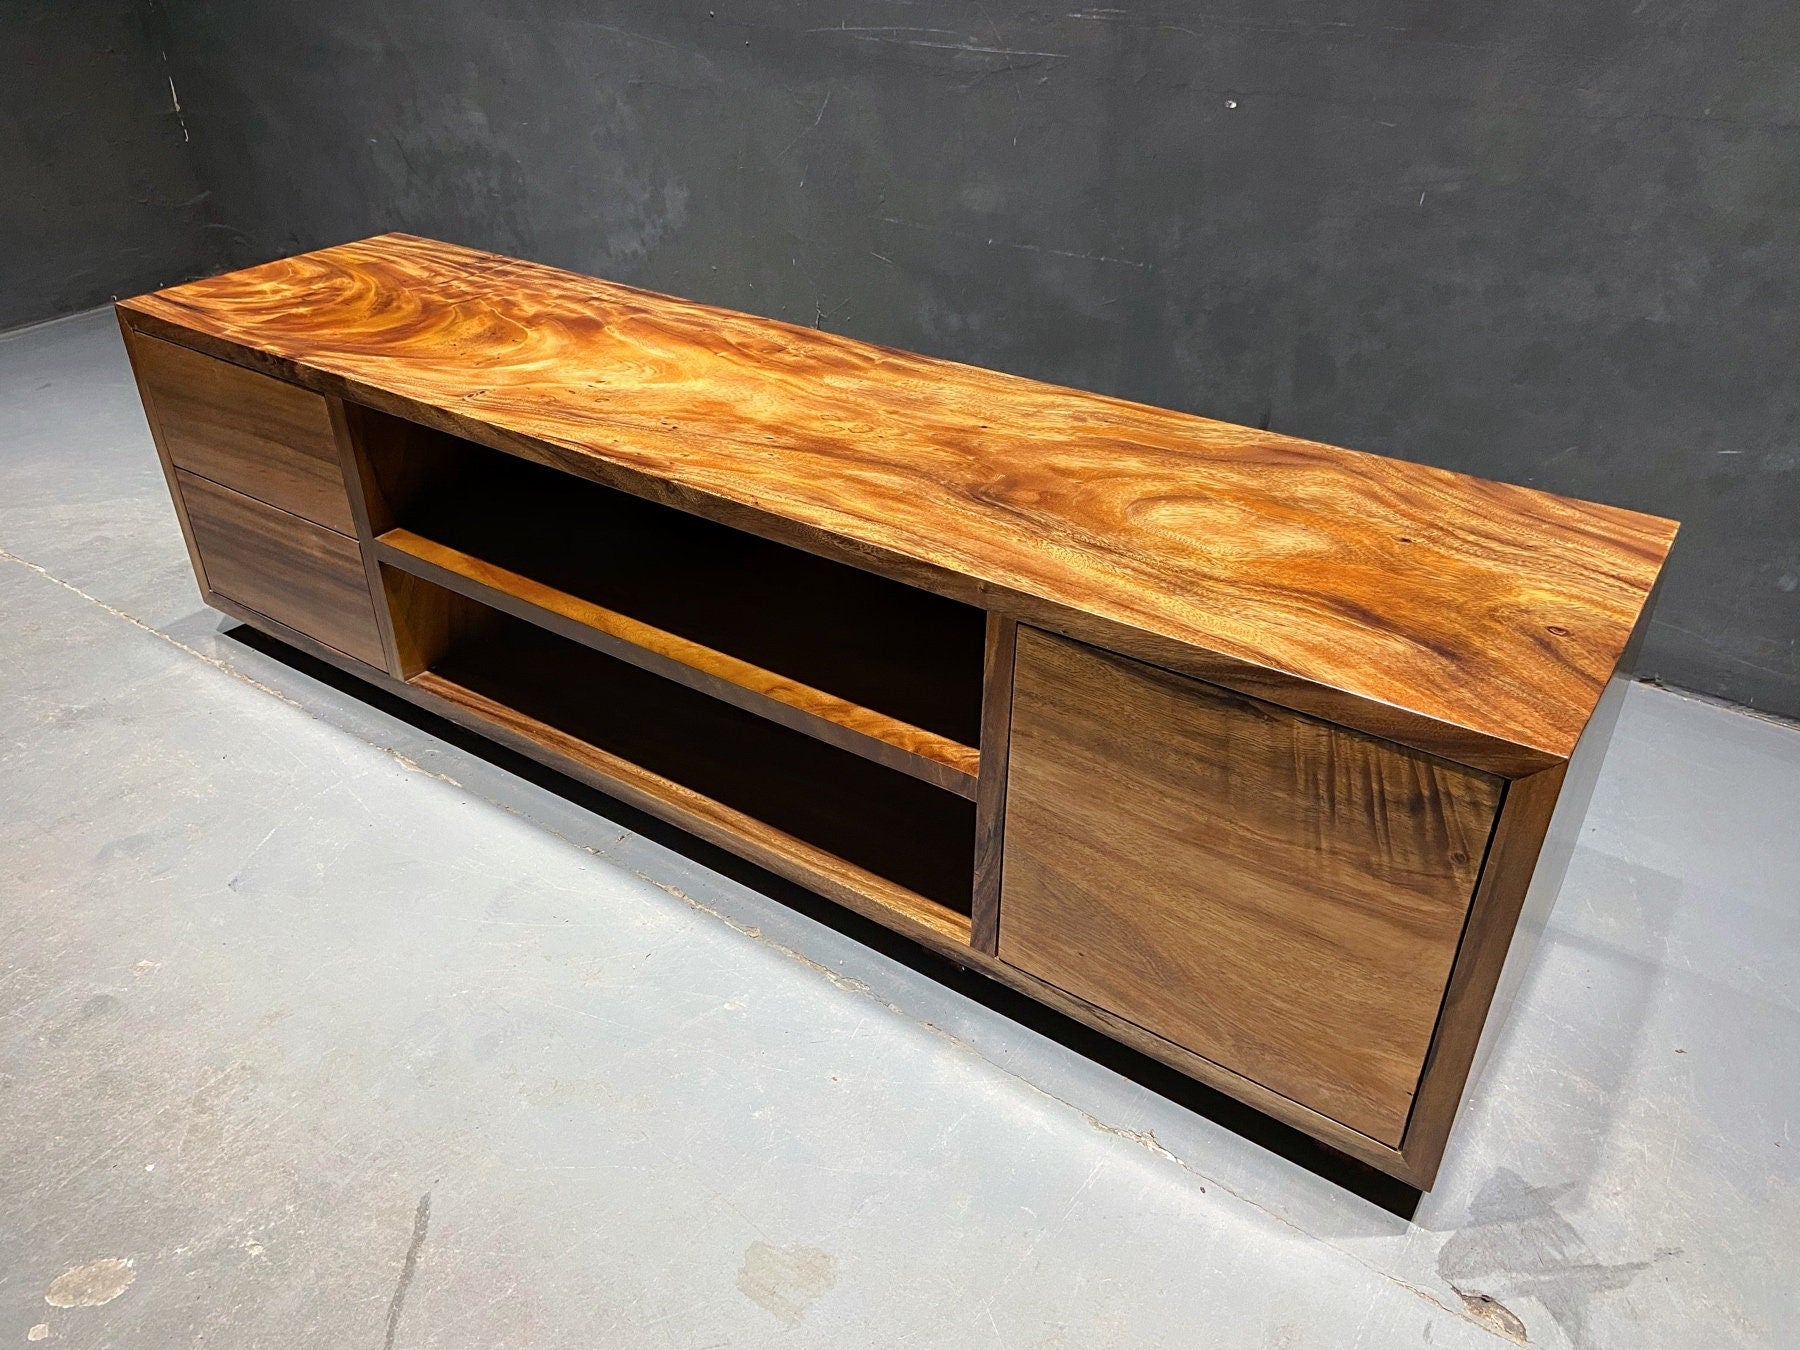 Natural wood furniture, Media cabinet made of walnut wood, Record Player Stand